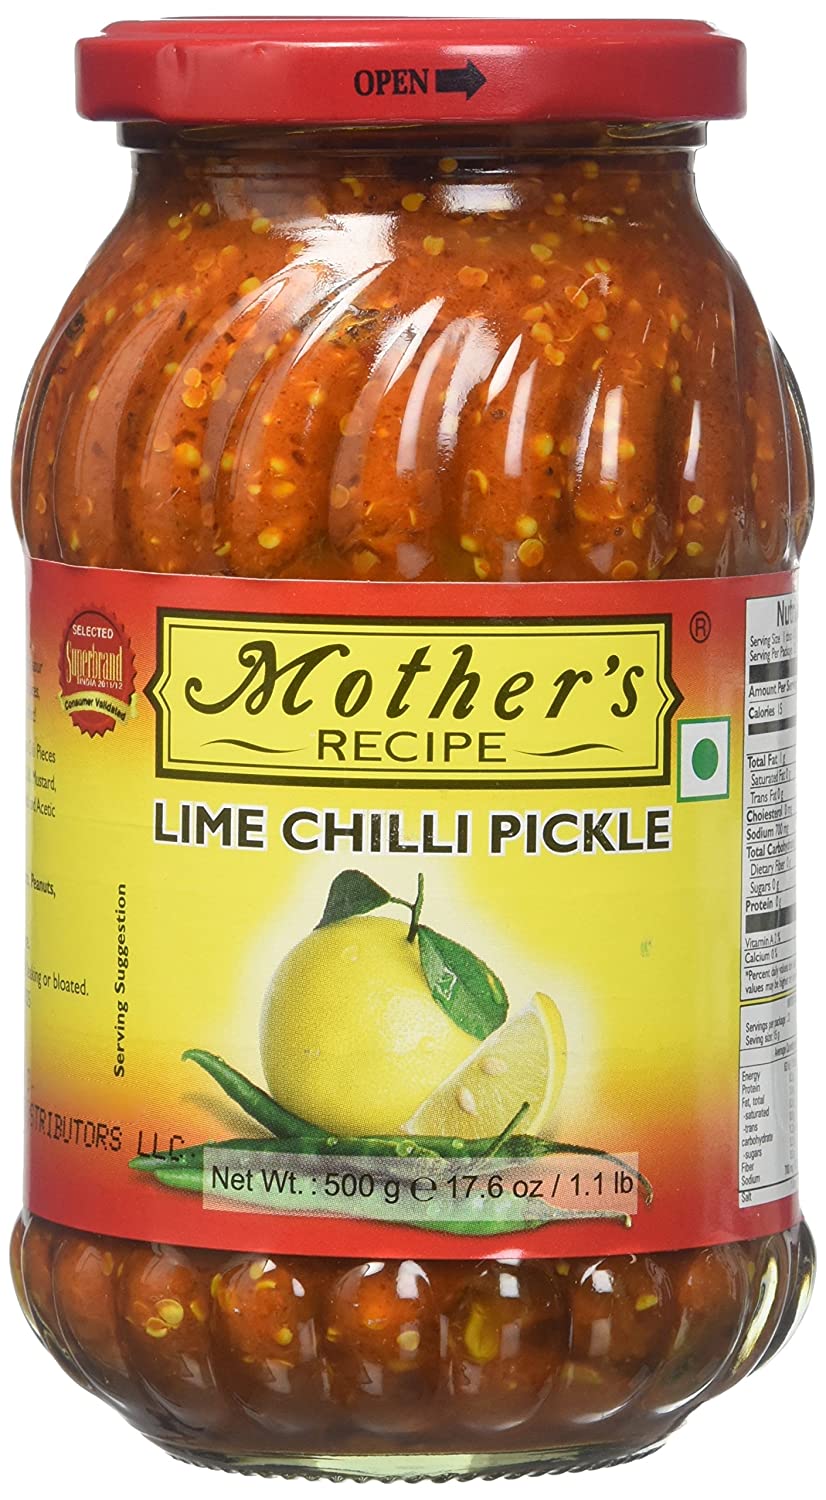 Lime Chilli Pickle